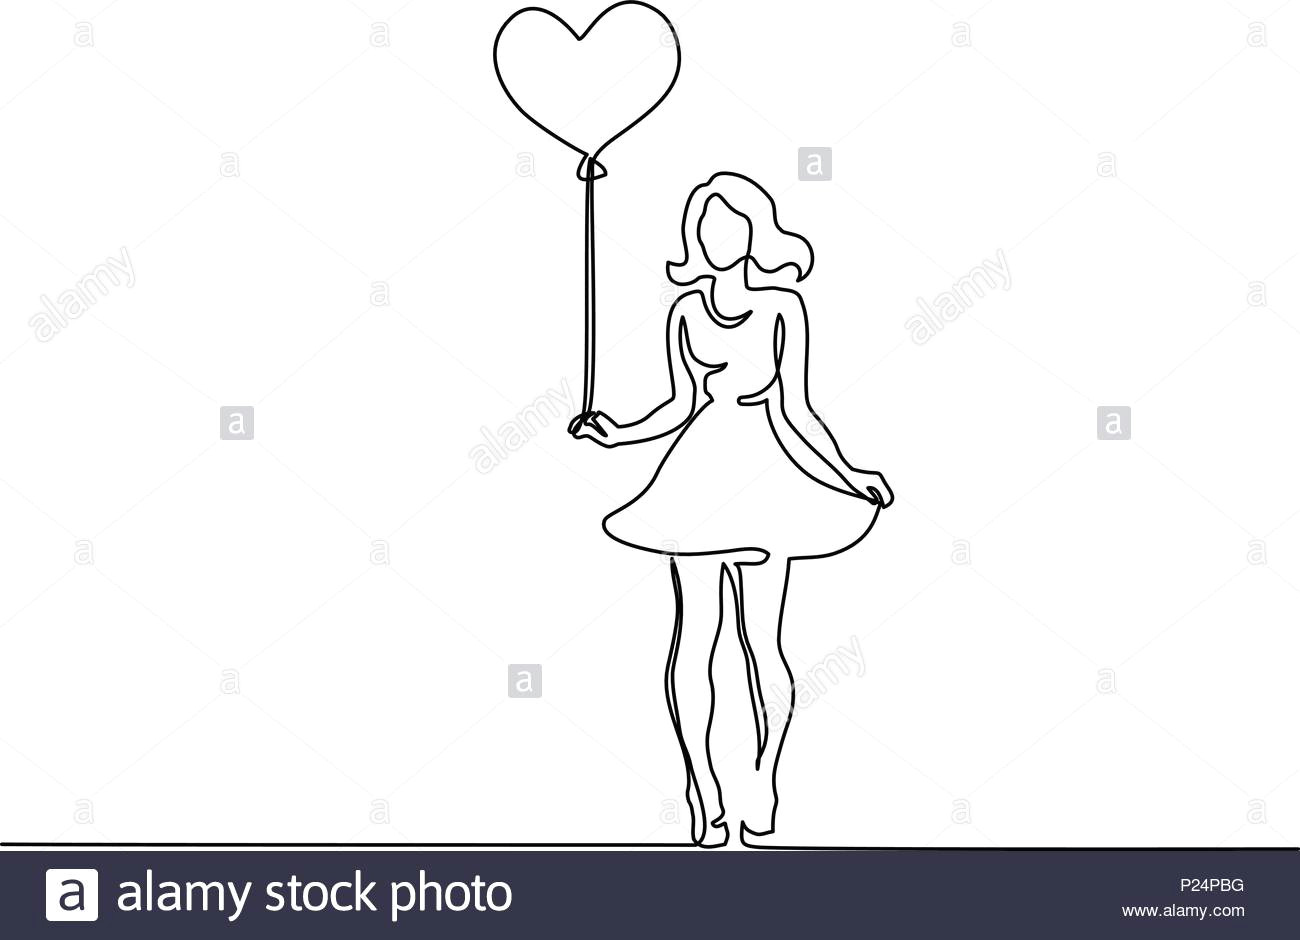 Drawing Of A Girl Holding Balloons Woman Holding Balloon Silhouette Stock Photos Woman Holding